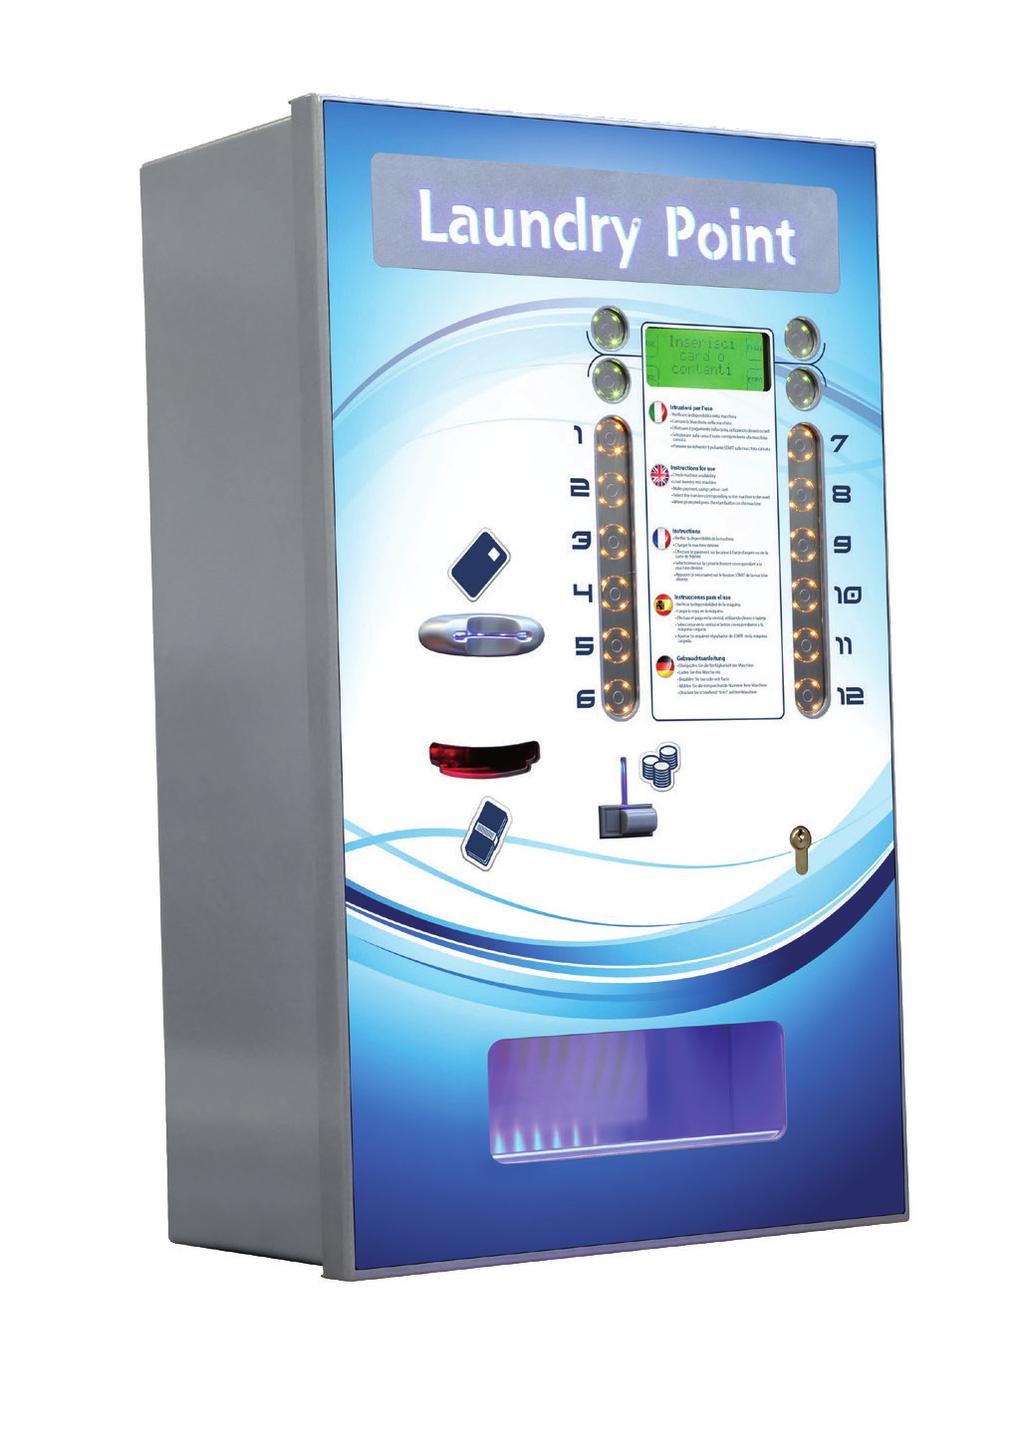 Cash Points Laundry Point A profitable choice for self-service laundrettes Designed to offer the self-service laundrettes a high-quality centralised cash point at an extremely competitive price.